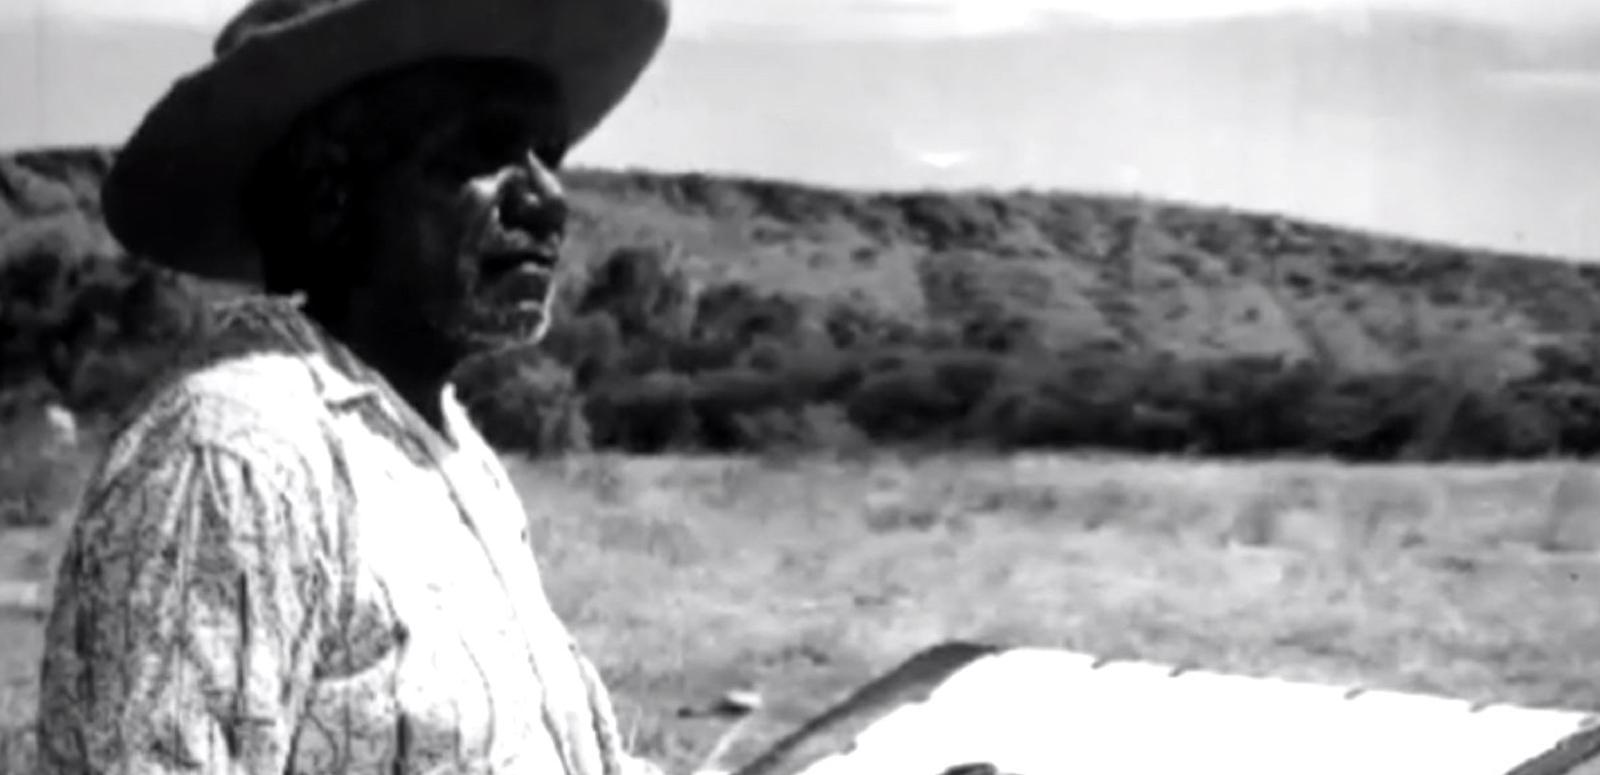 Indigenous artist Albert Namatjira standing in the outback, pictured in profile and looking out at the landscape